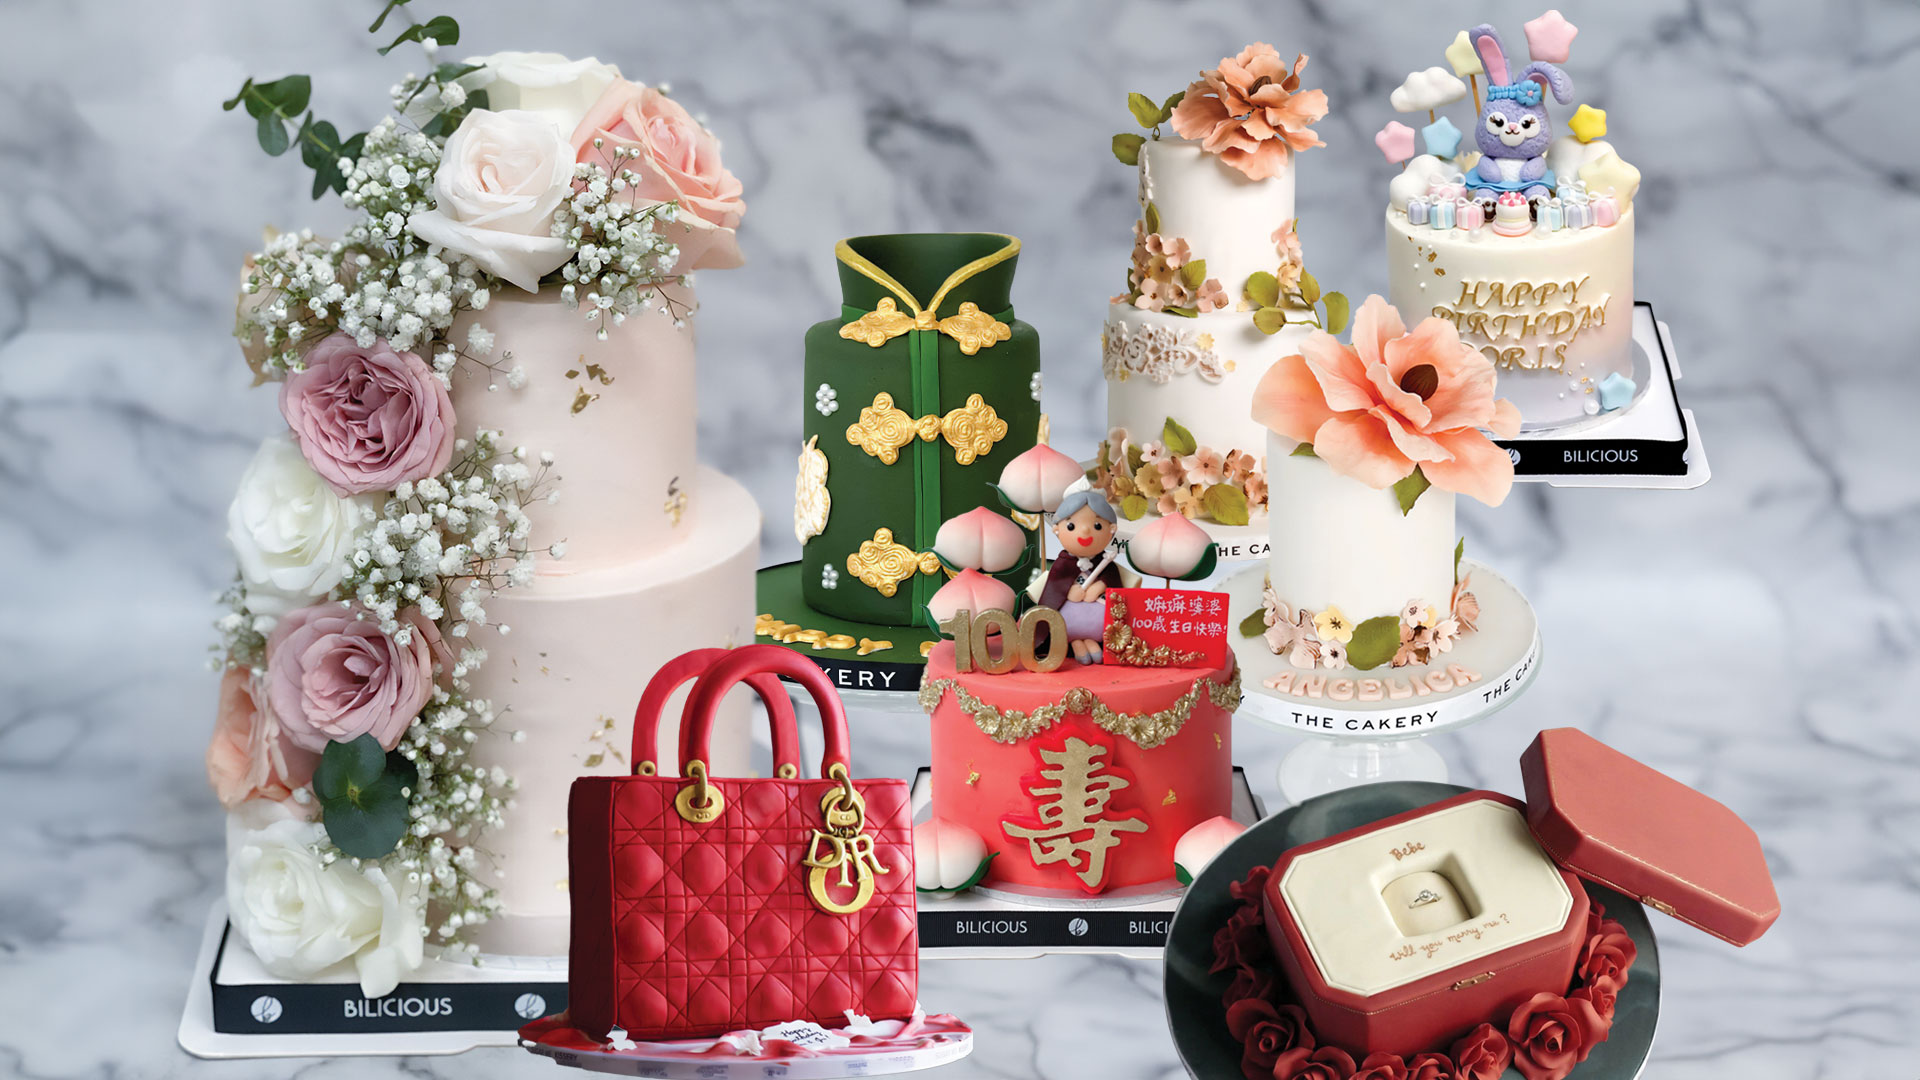 Hot Cakes: Customised creations bring aesthetic delight and originality to every celebration